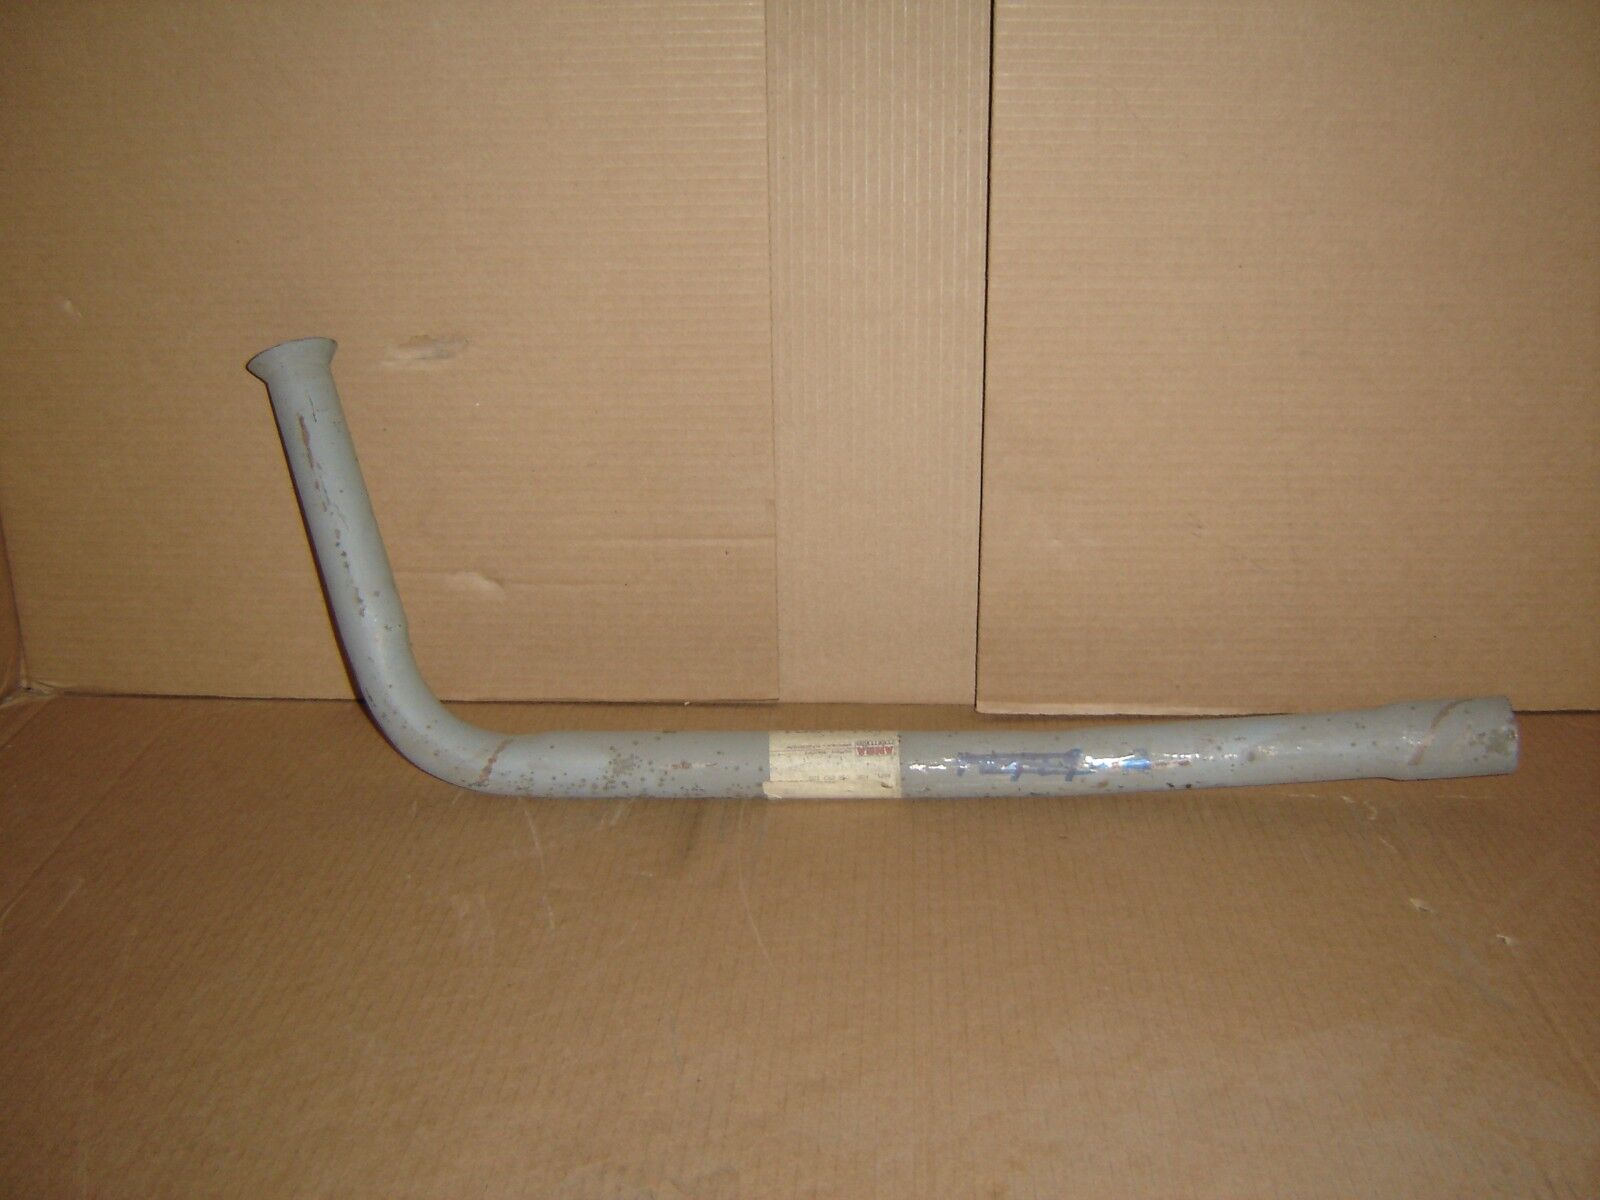 ANSA FRONT EXHAUST ENGINE DOWN PIPE VW1301 VOLKS*WAGEN GOLF SCIROCCO 1.1L